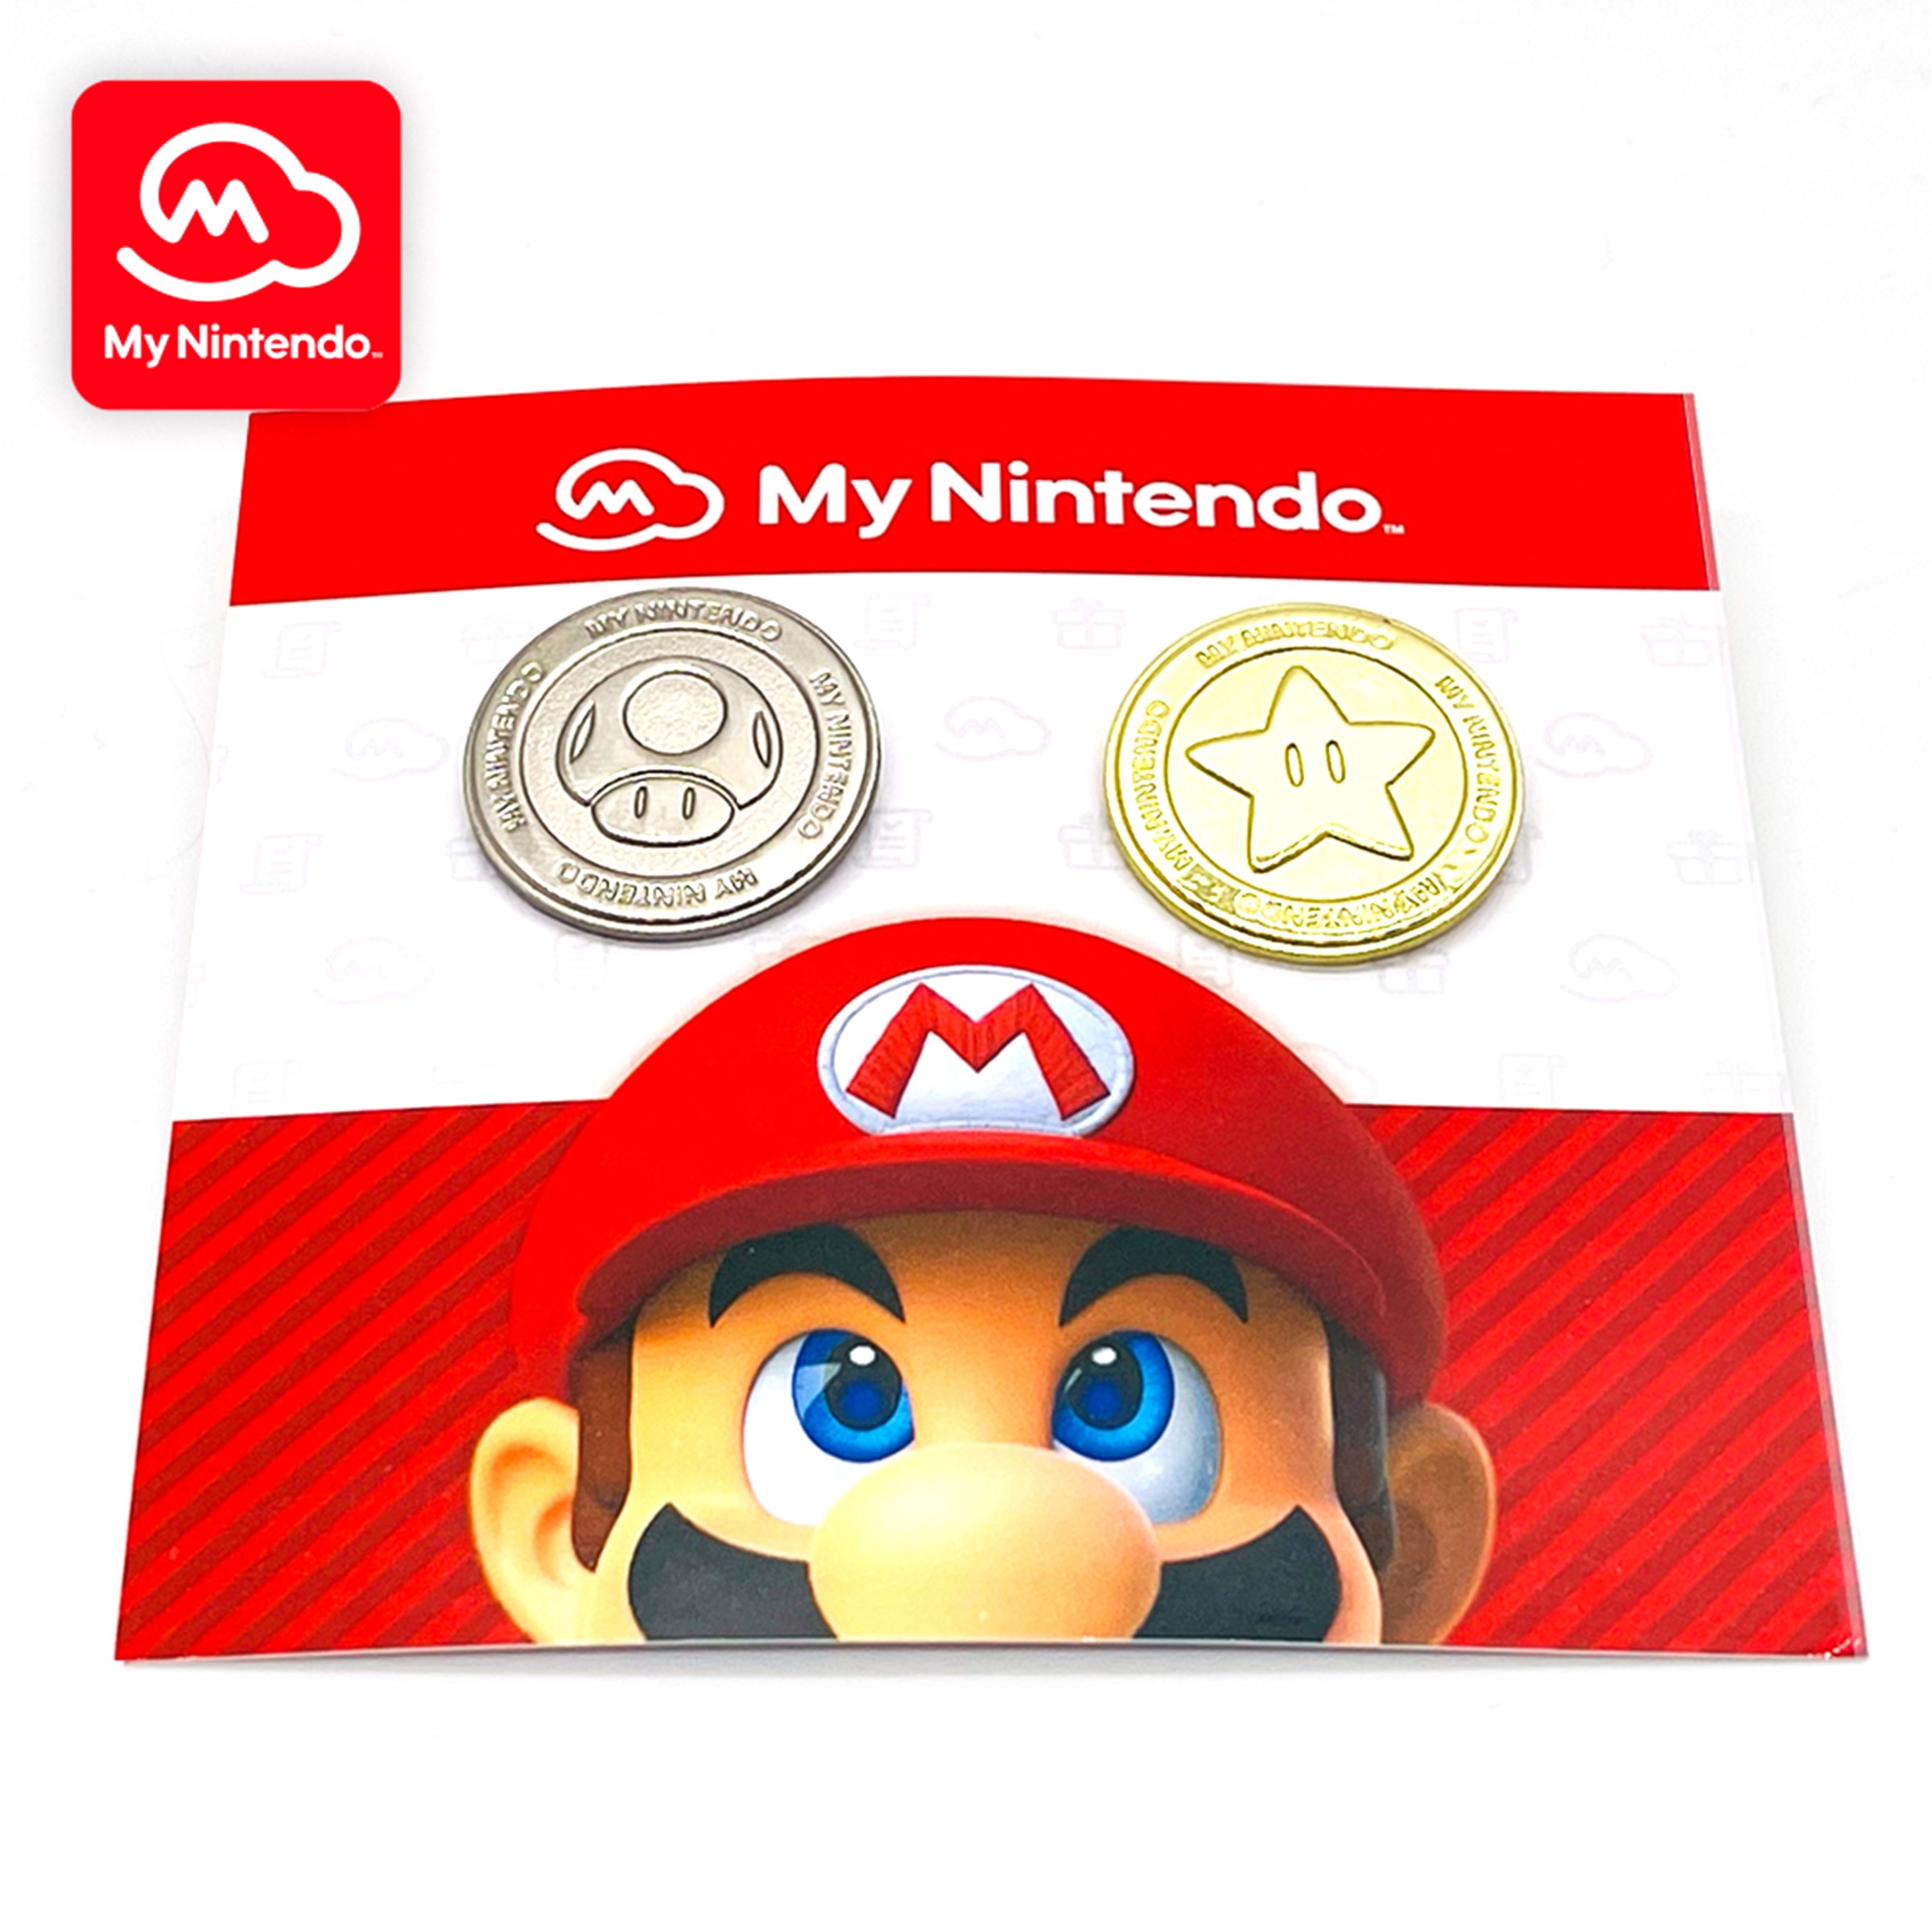 My Nintendo Platinum Point and Gold Coins Pin Set - Nintendo Site